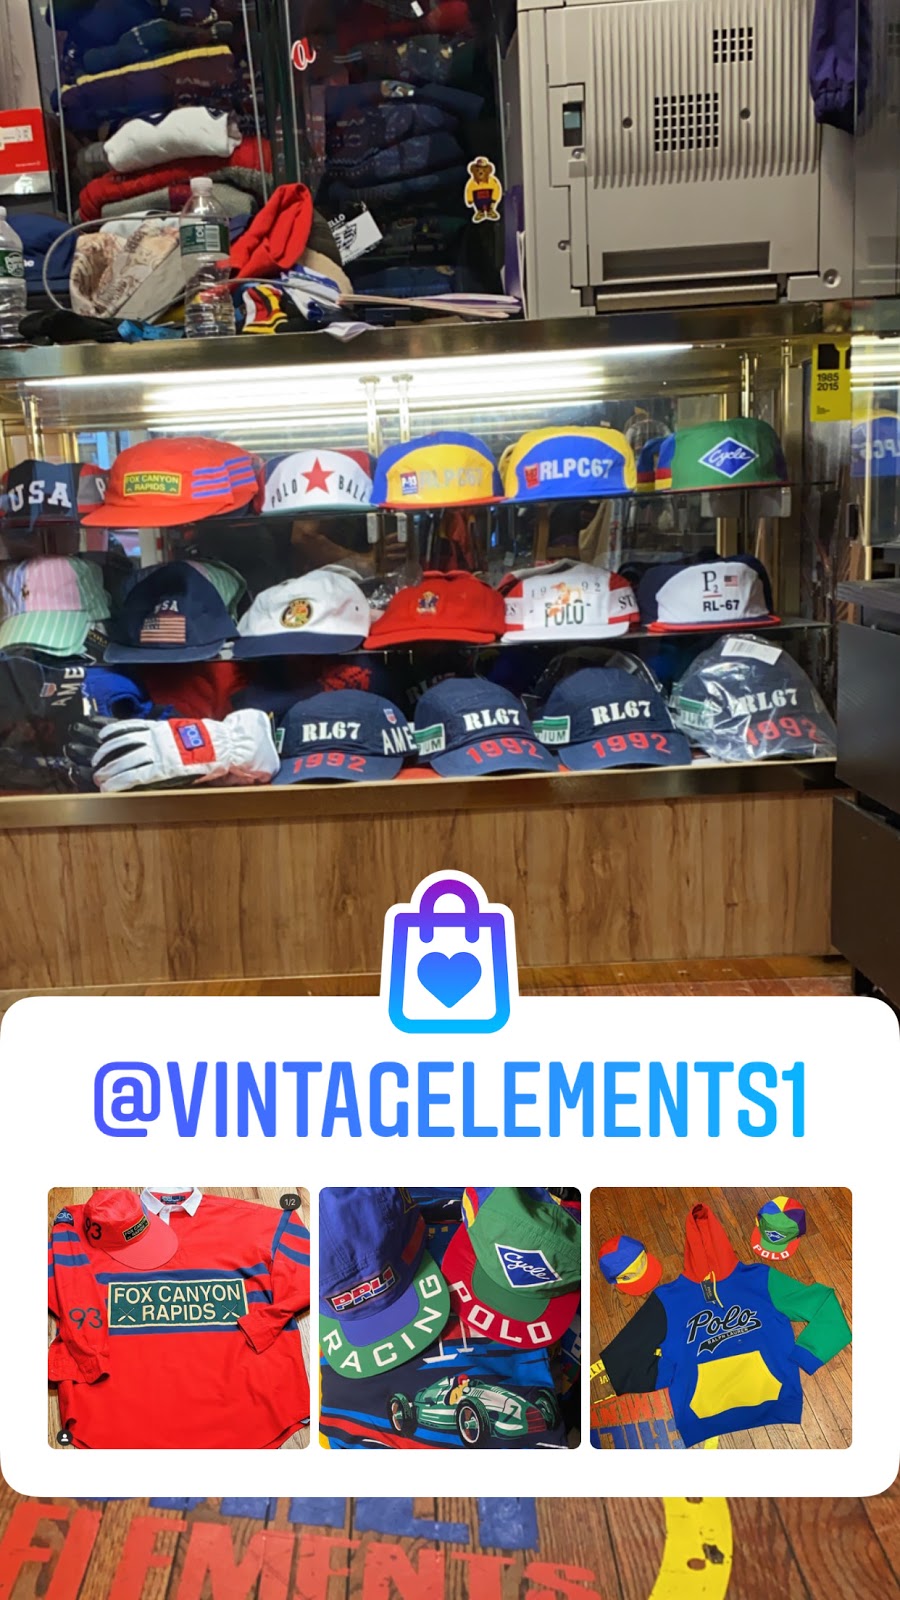 Vintagelements boutique | 94-18 Corona Ave., Queens, NY 11373 | Phone: (646) 387-9492